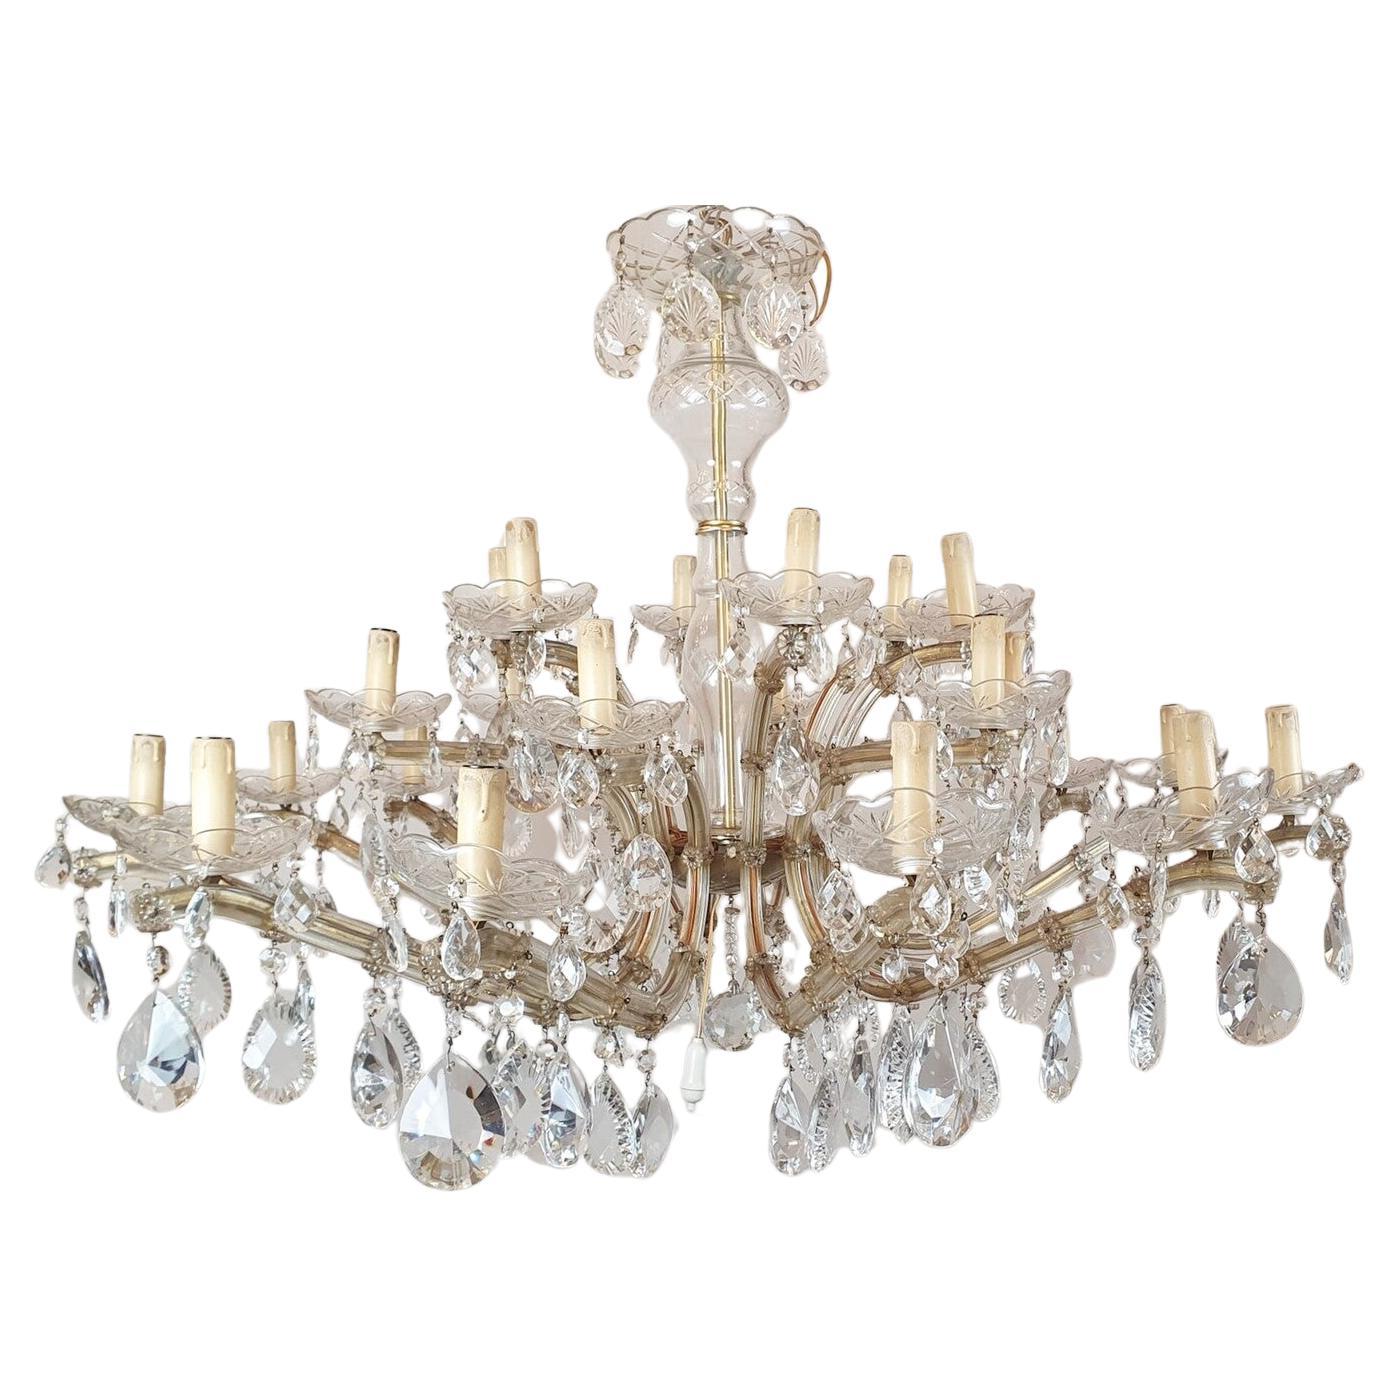 How many lights do I need for a dining room chandelier?